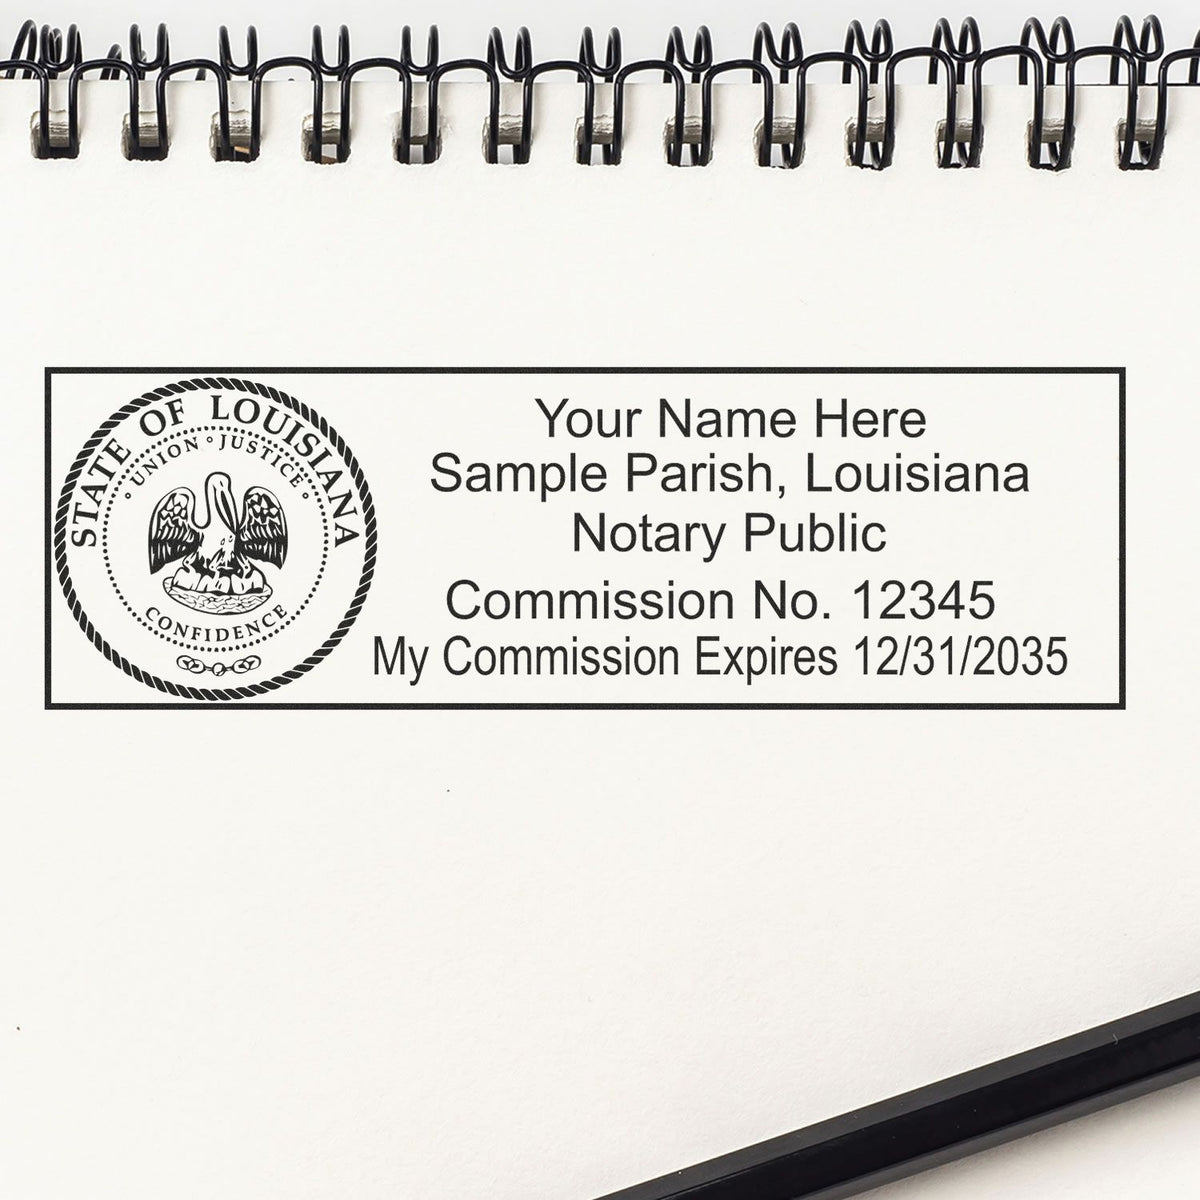 An alternative view of the PSI Louisiana Notary Stamp stamped on a sheet of paper showing the image in use